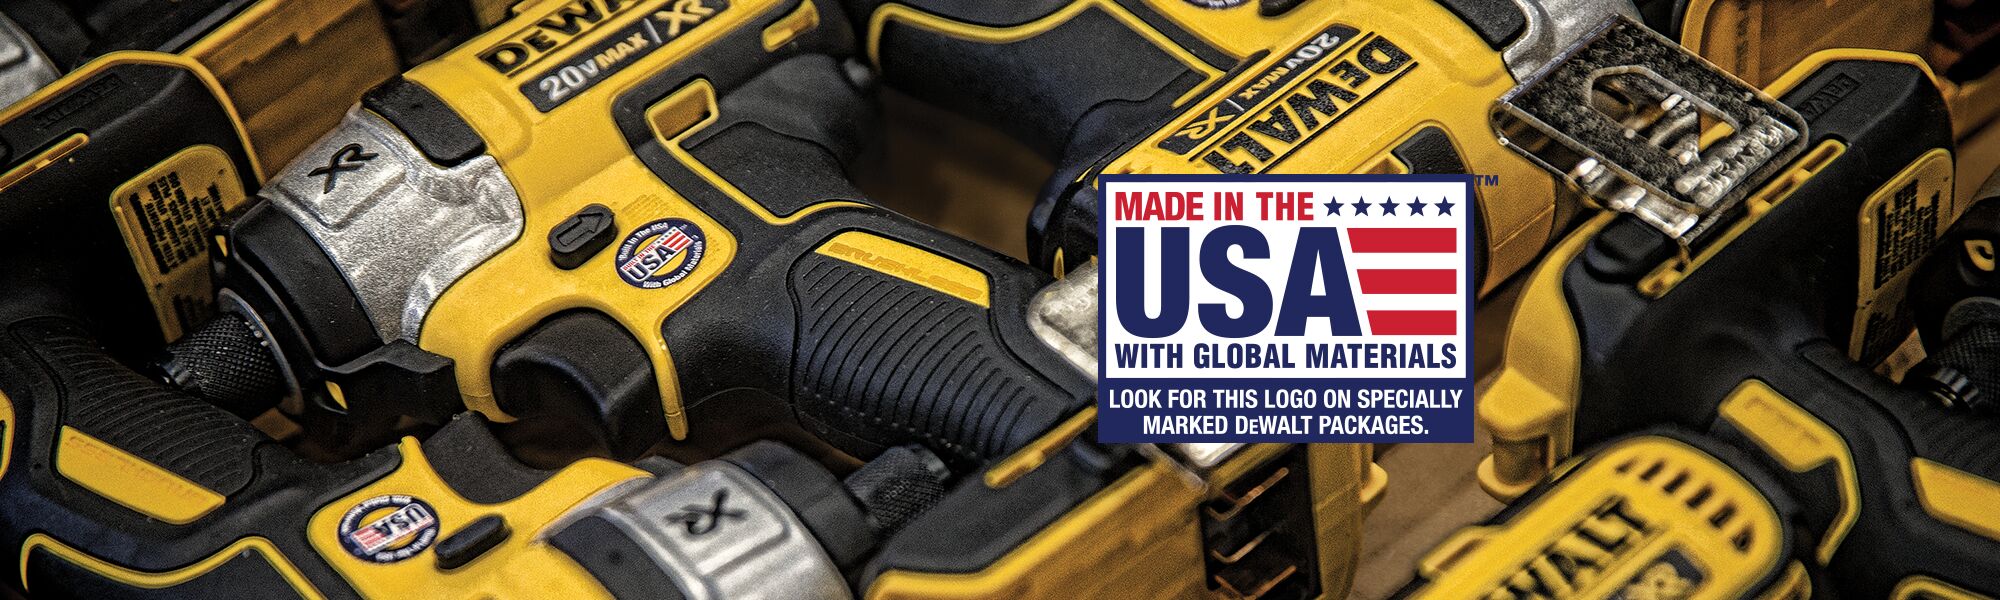 DeWalt Tools Made in the USA With Global Materials Label